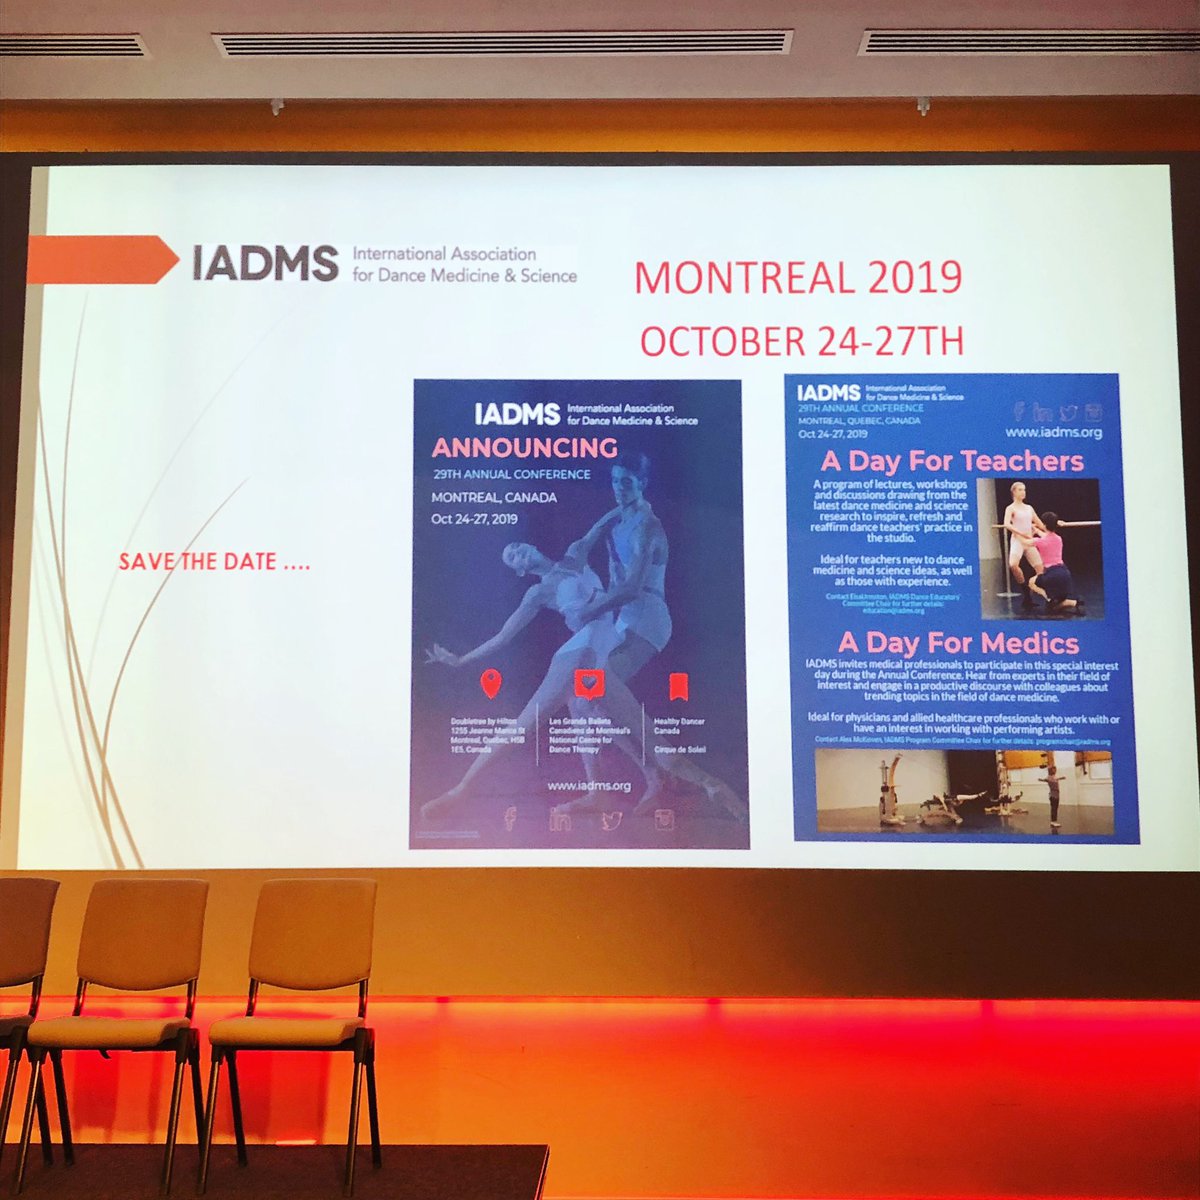 Well folks that’s all for #IADMS2018 we had another fantastic conference thanks to our great members, hosts, sponsors etc etc! Time to get excited for #IADMS2019 🇨🇦